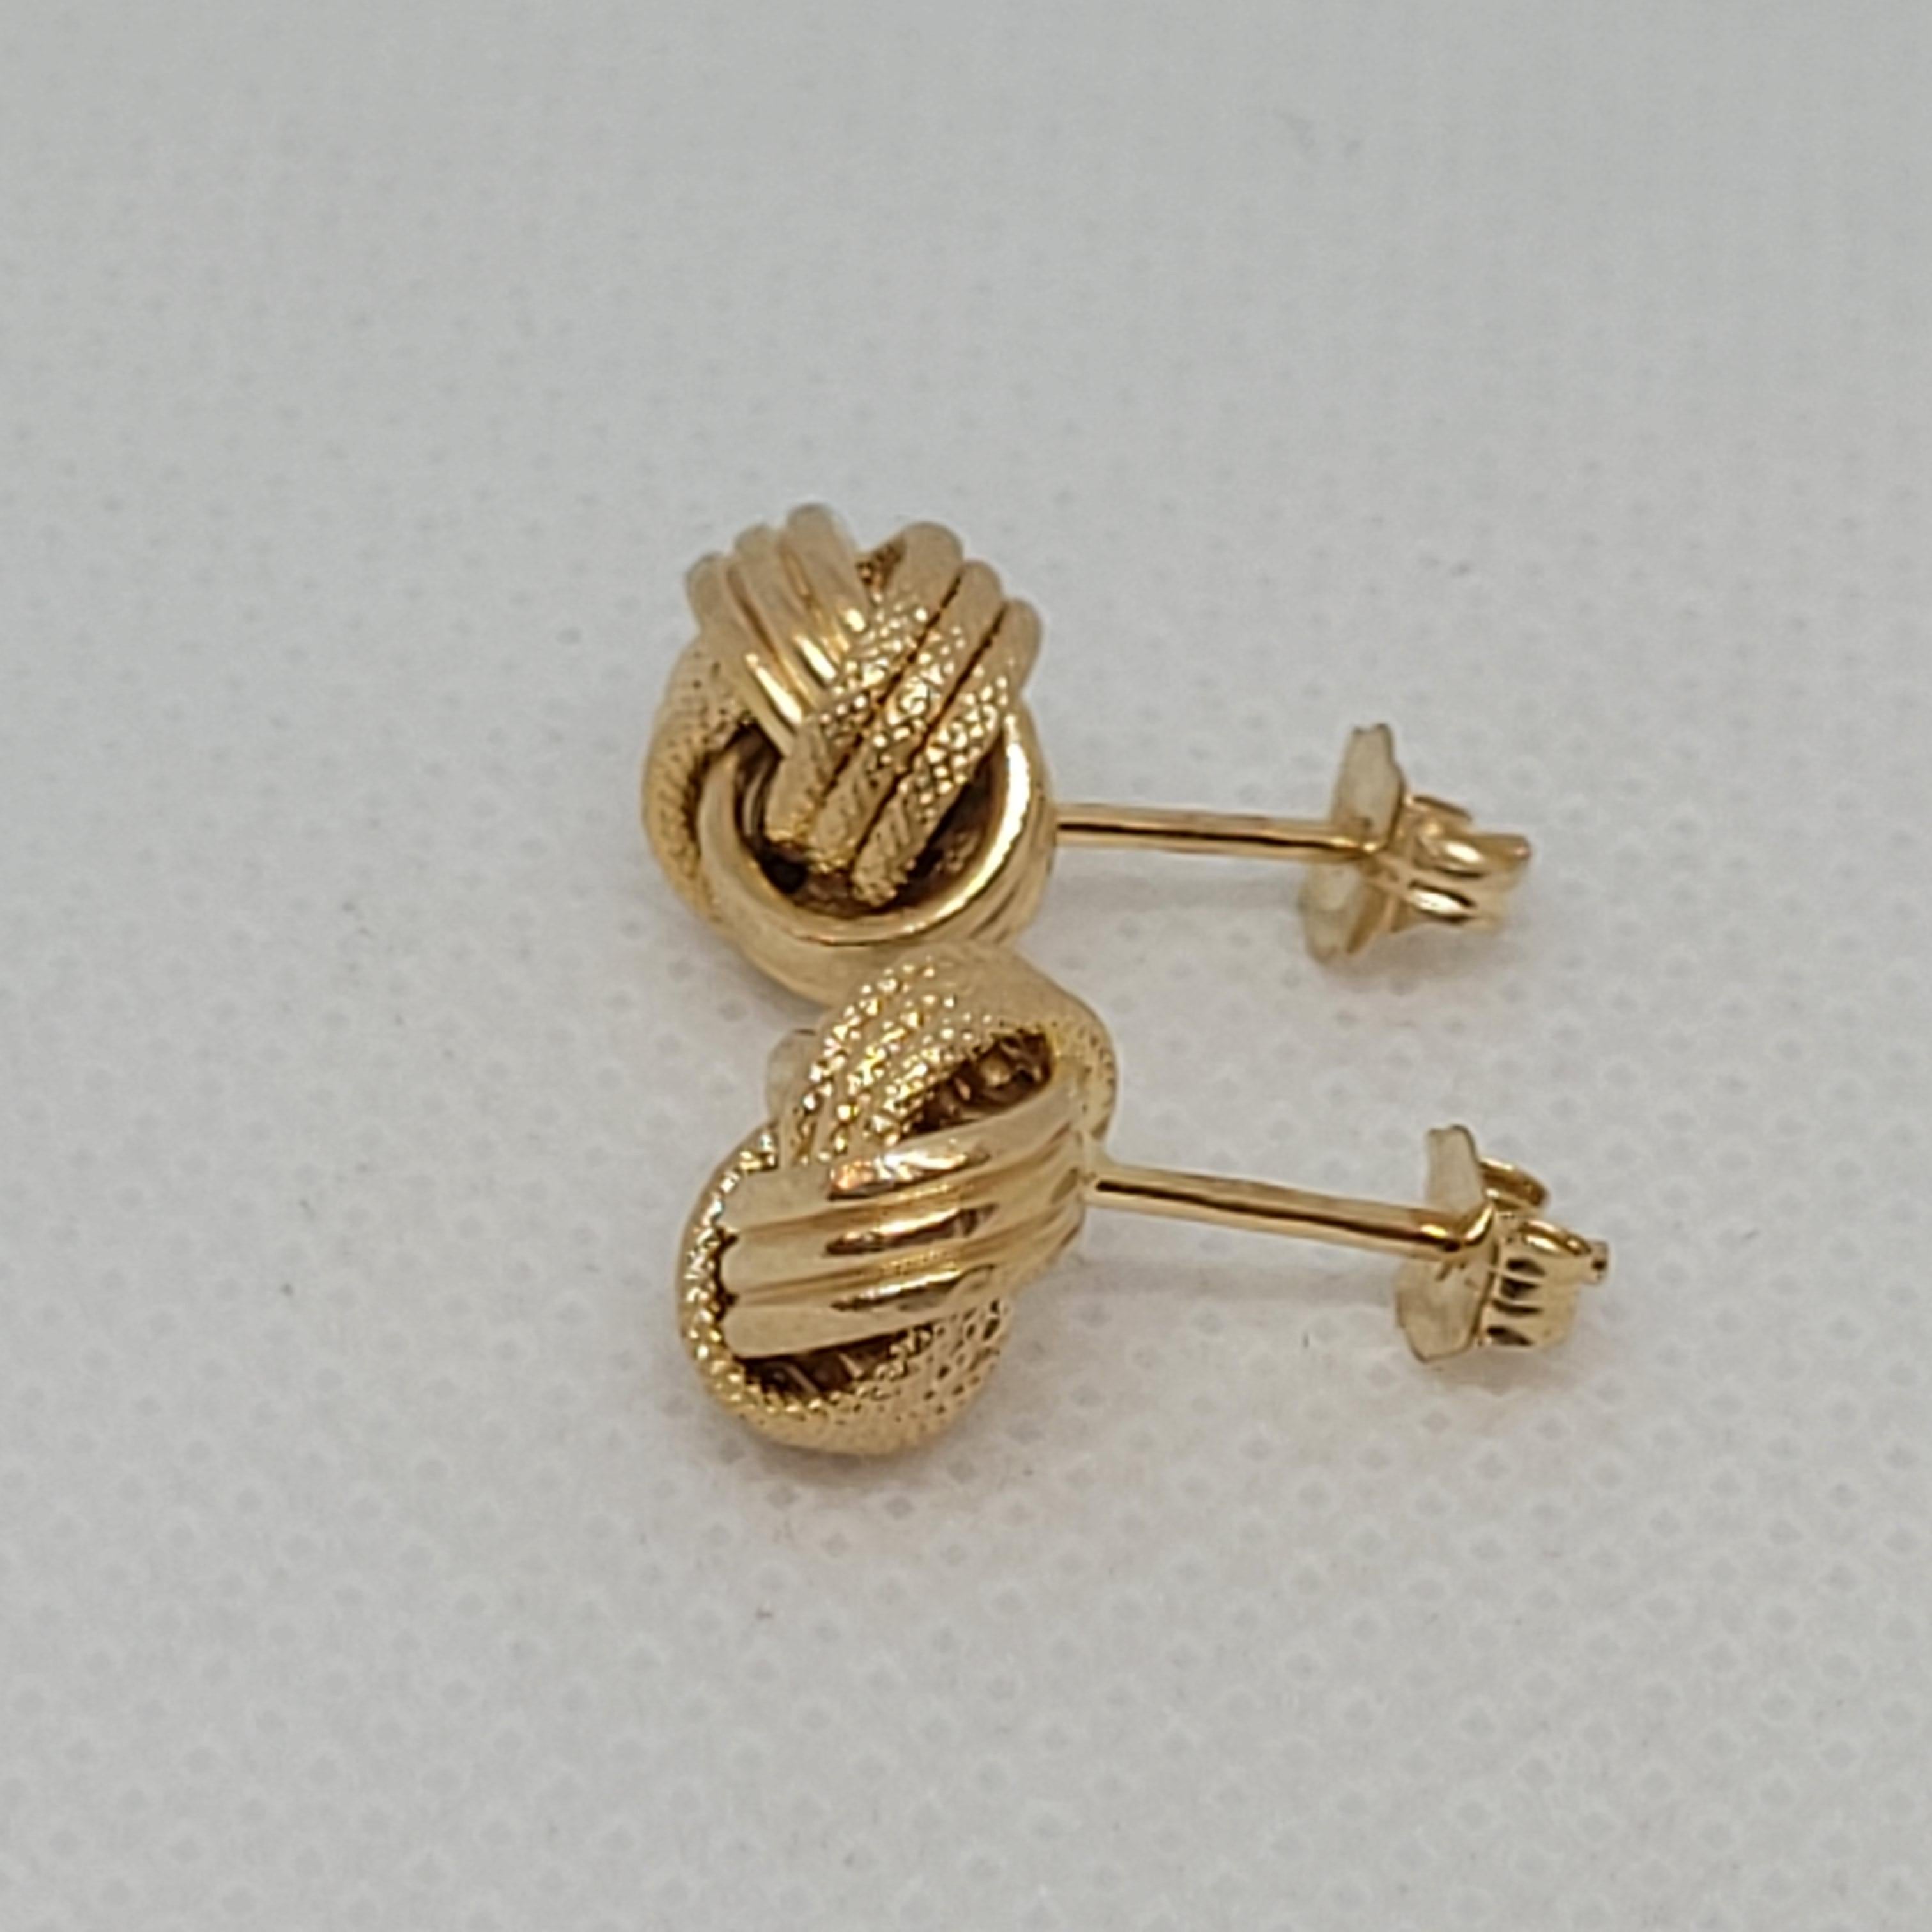 14kt Yellow Gold Knot Earrings, Friction Post with Push-On Backings, .7 Grams 2